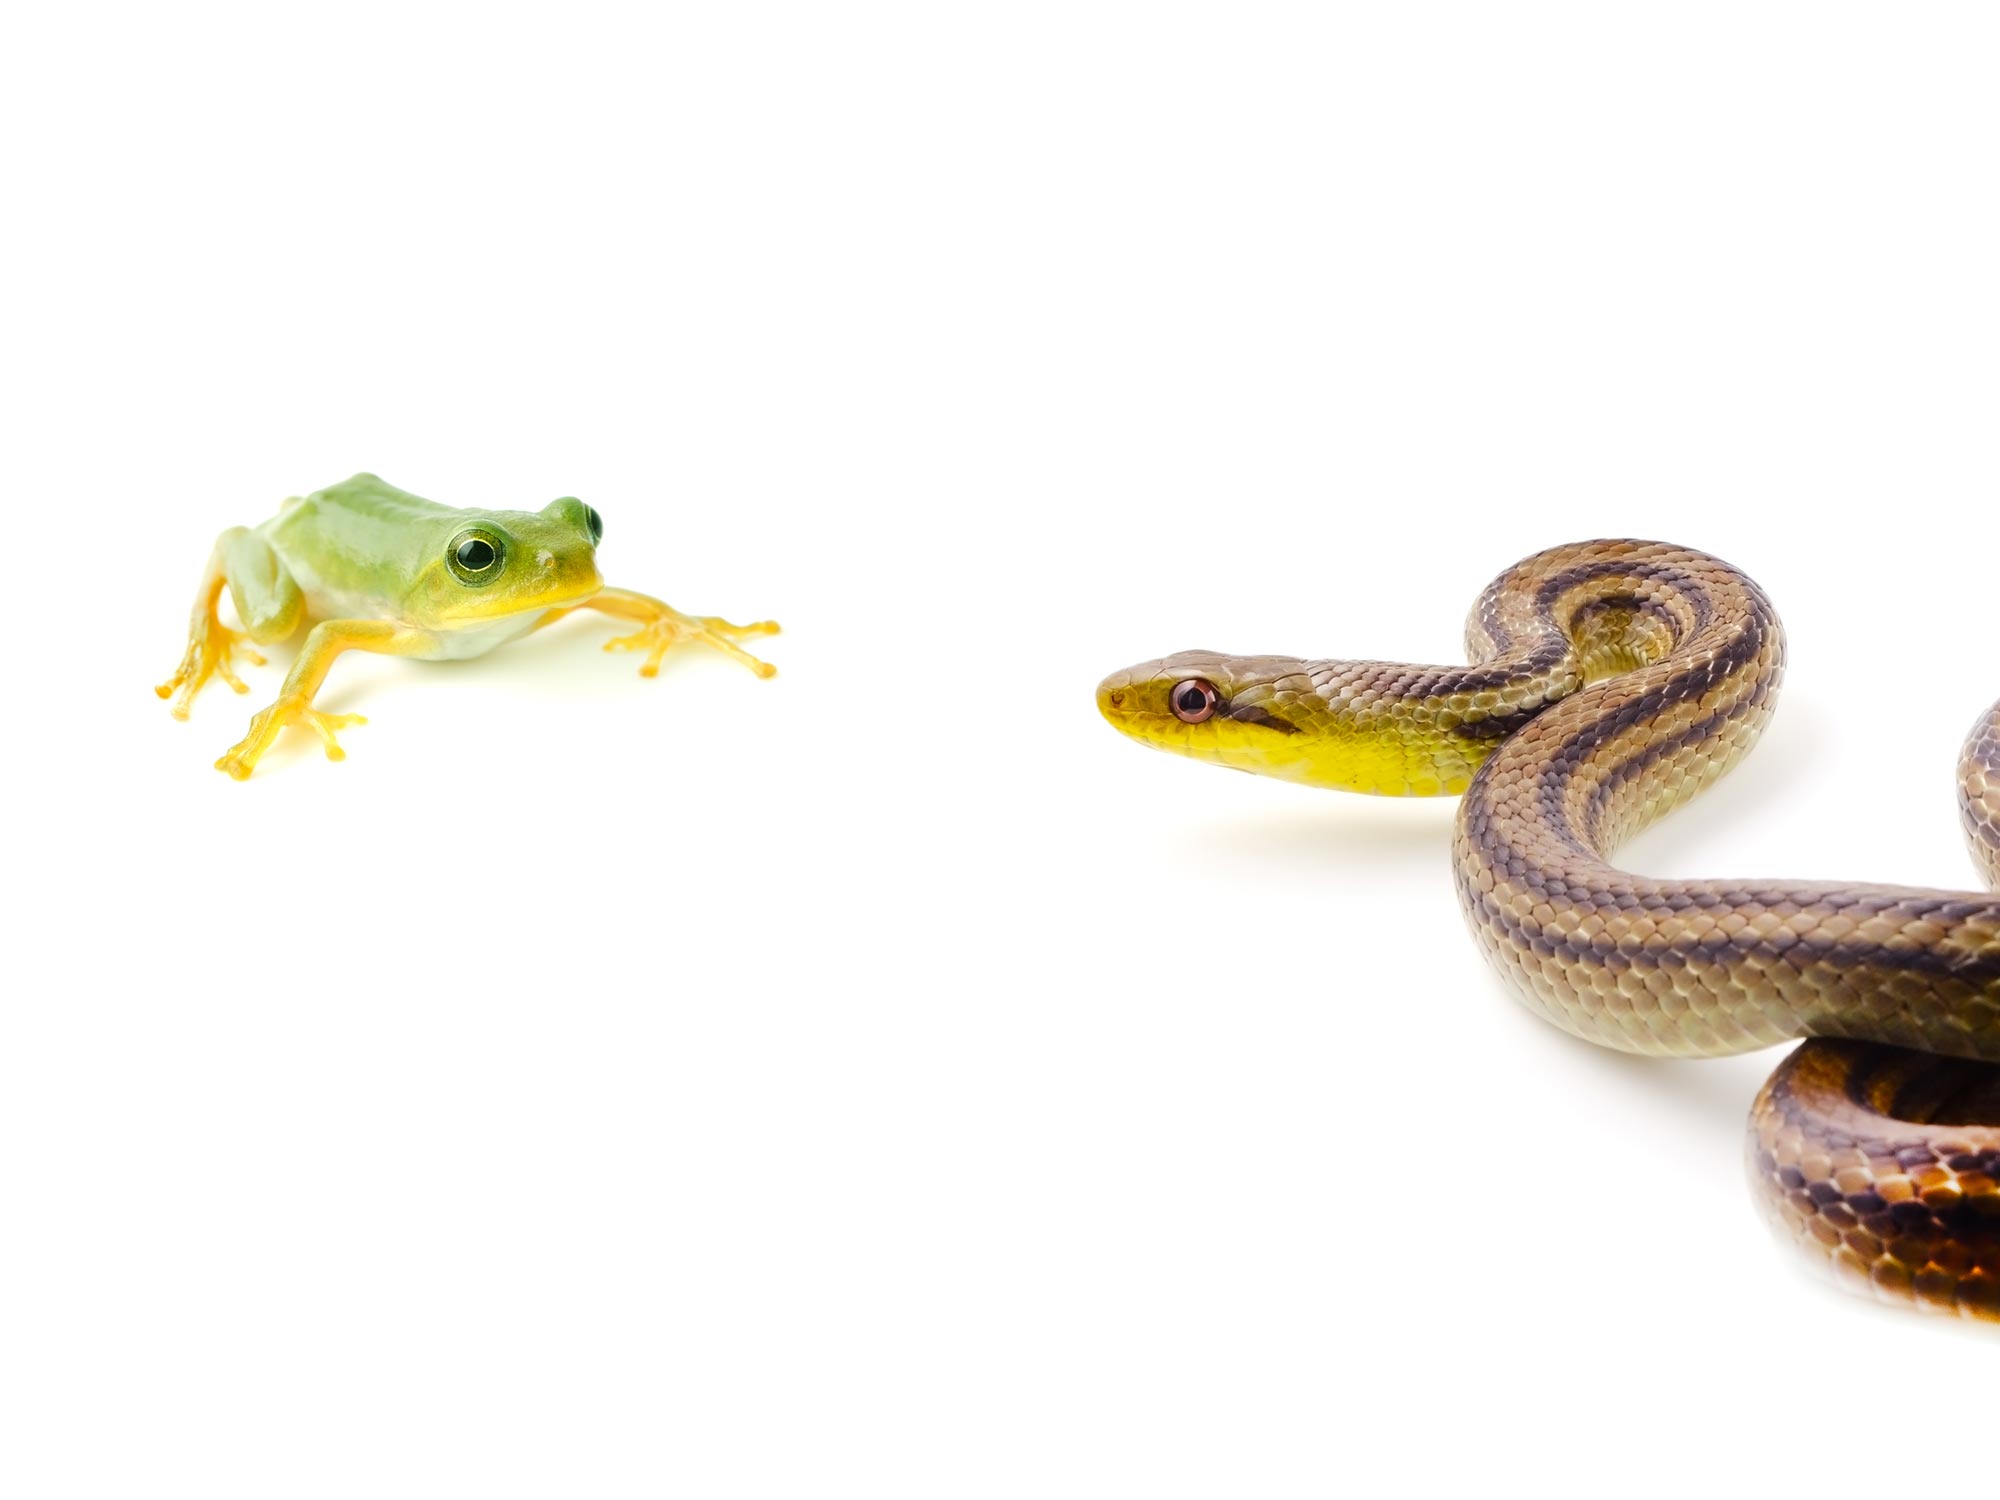 Testing The Patience Of Predators And Prey Snakes And Frogs Appear To